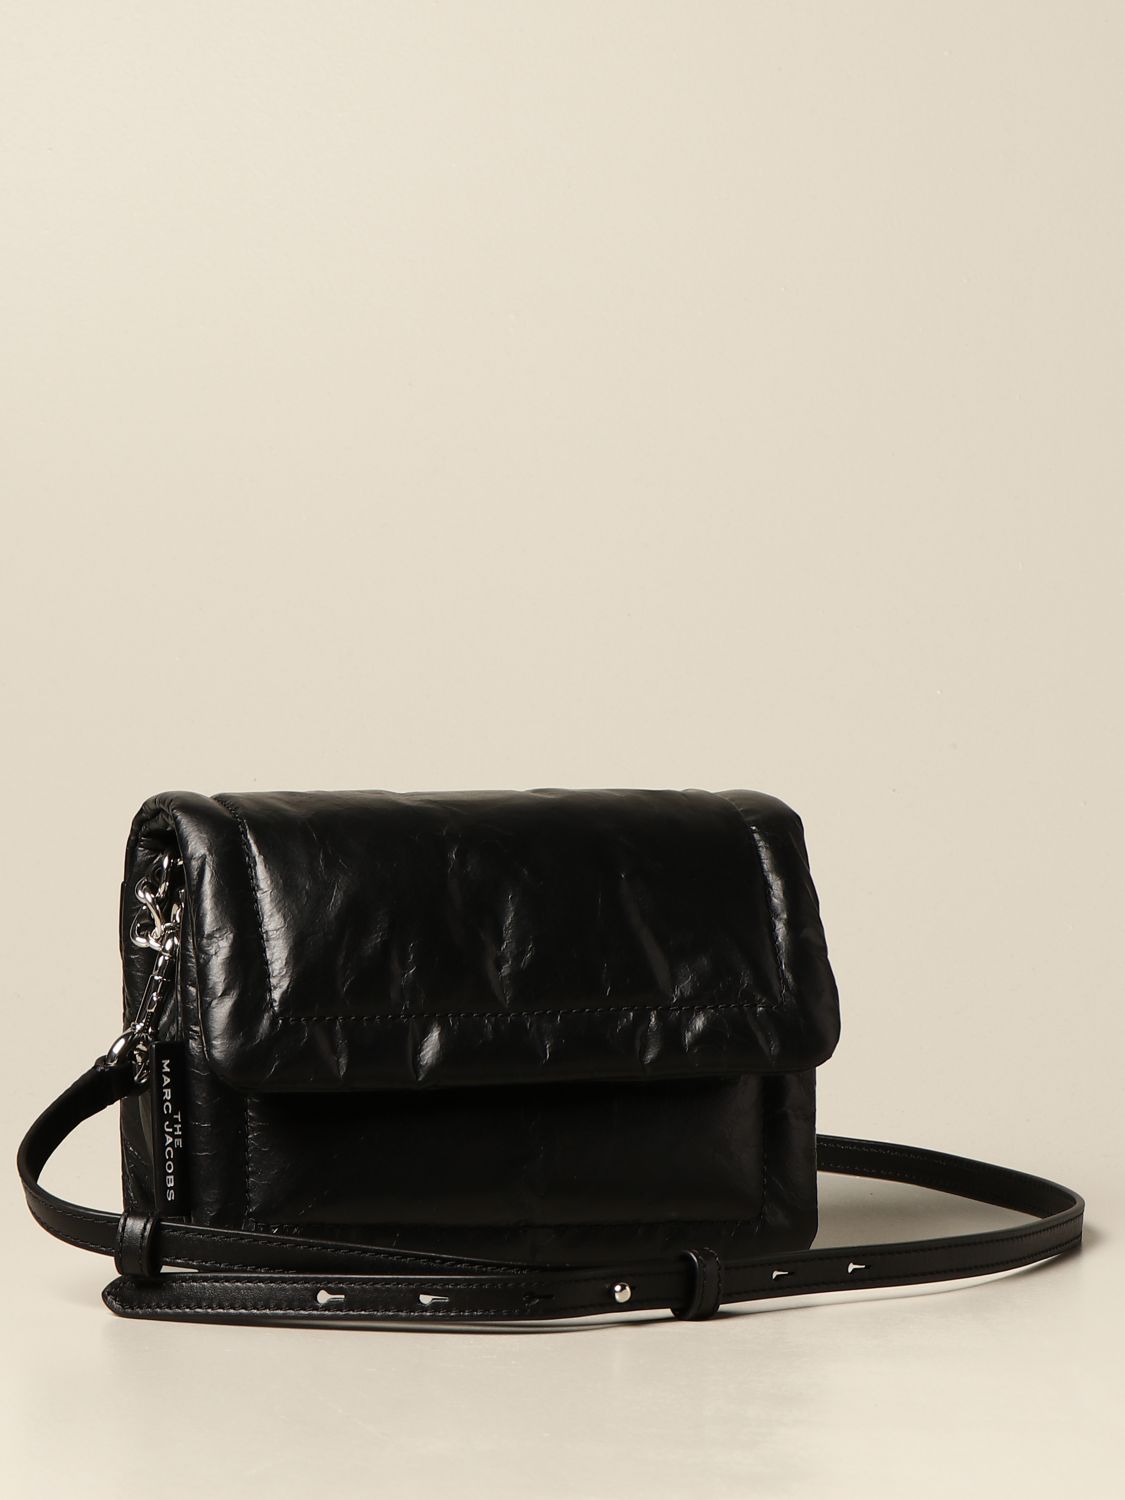 MARC JACOBS: The Pillow bag in ultralight leather - Black  Marc Jacobs  crossbody bags M0015416 online at